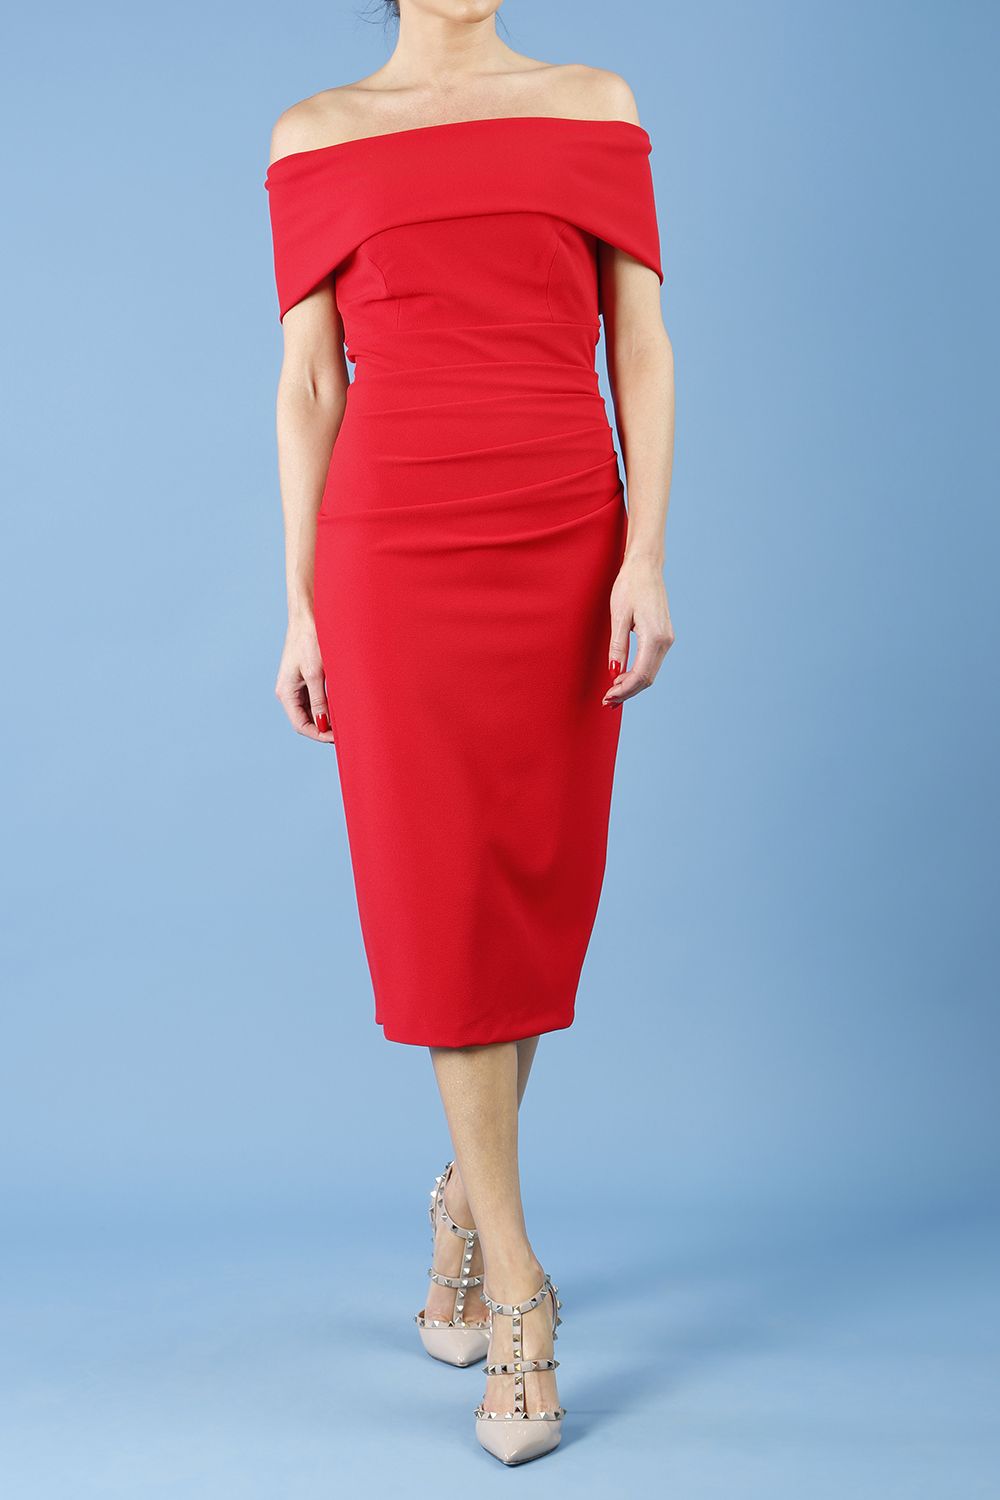 model is wearing diva catwalk amelia pencil dress with bardot neckline and ruched back in scarlet red front